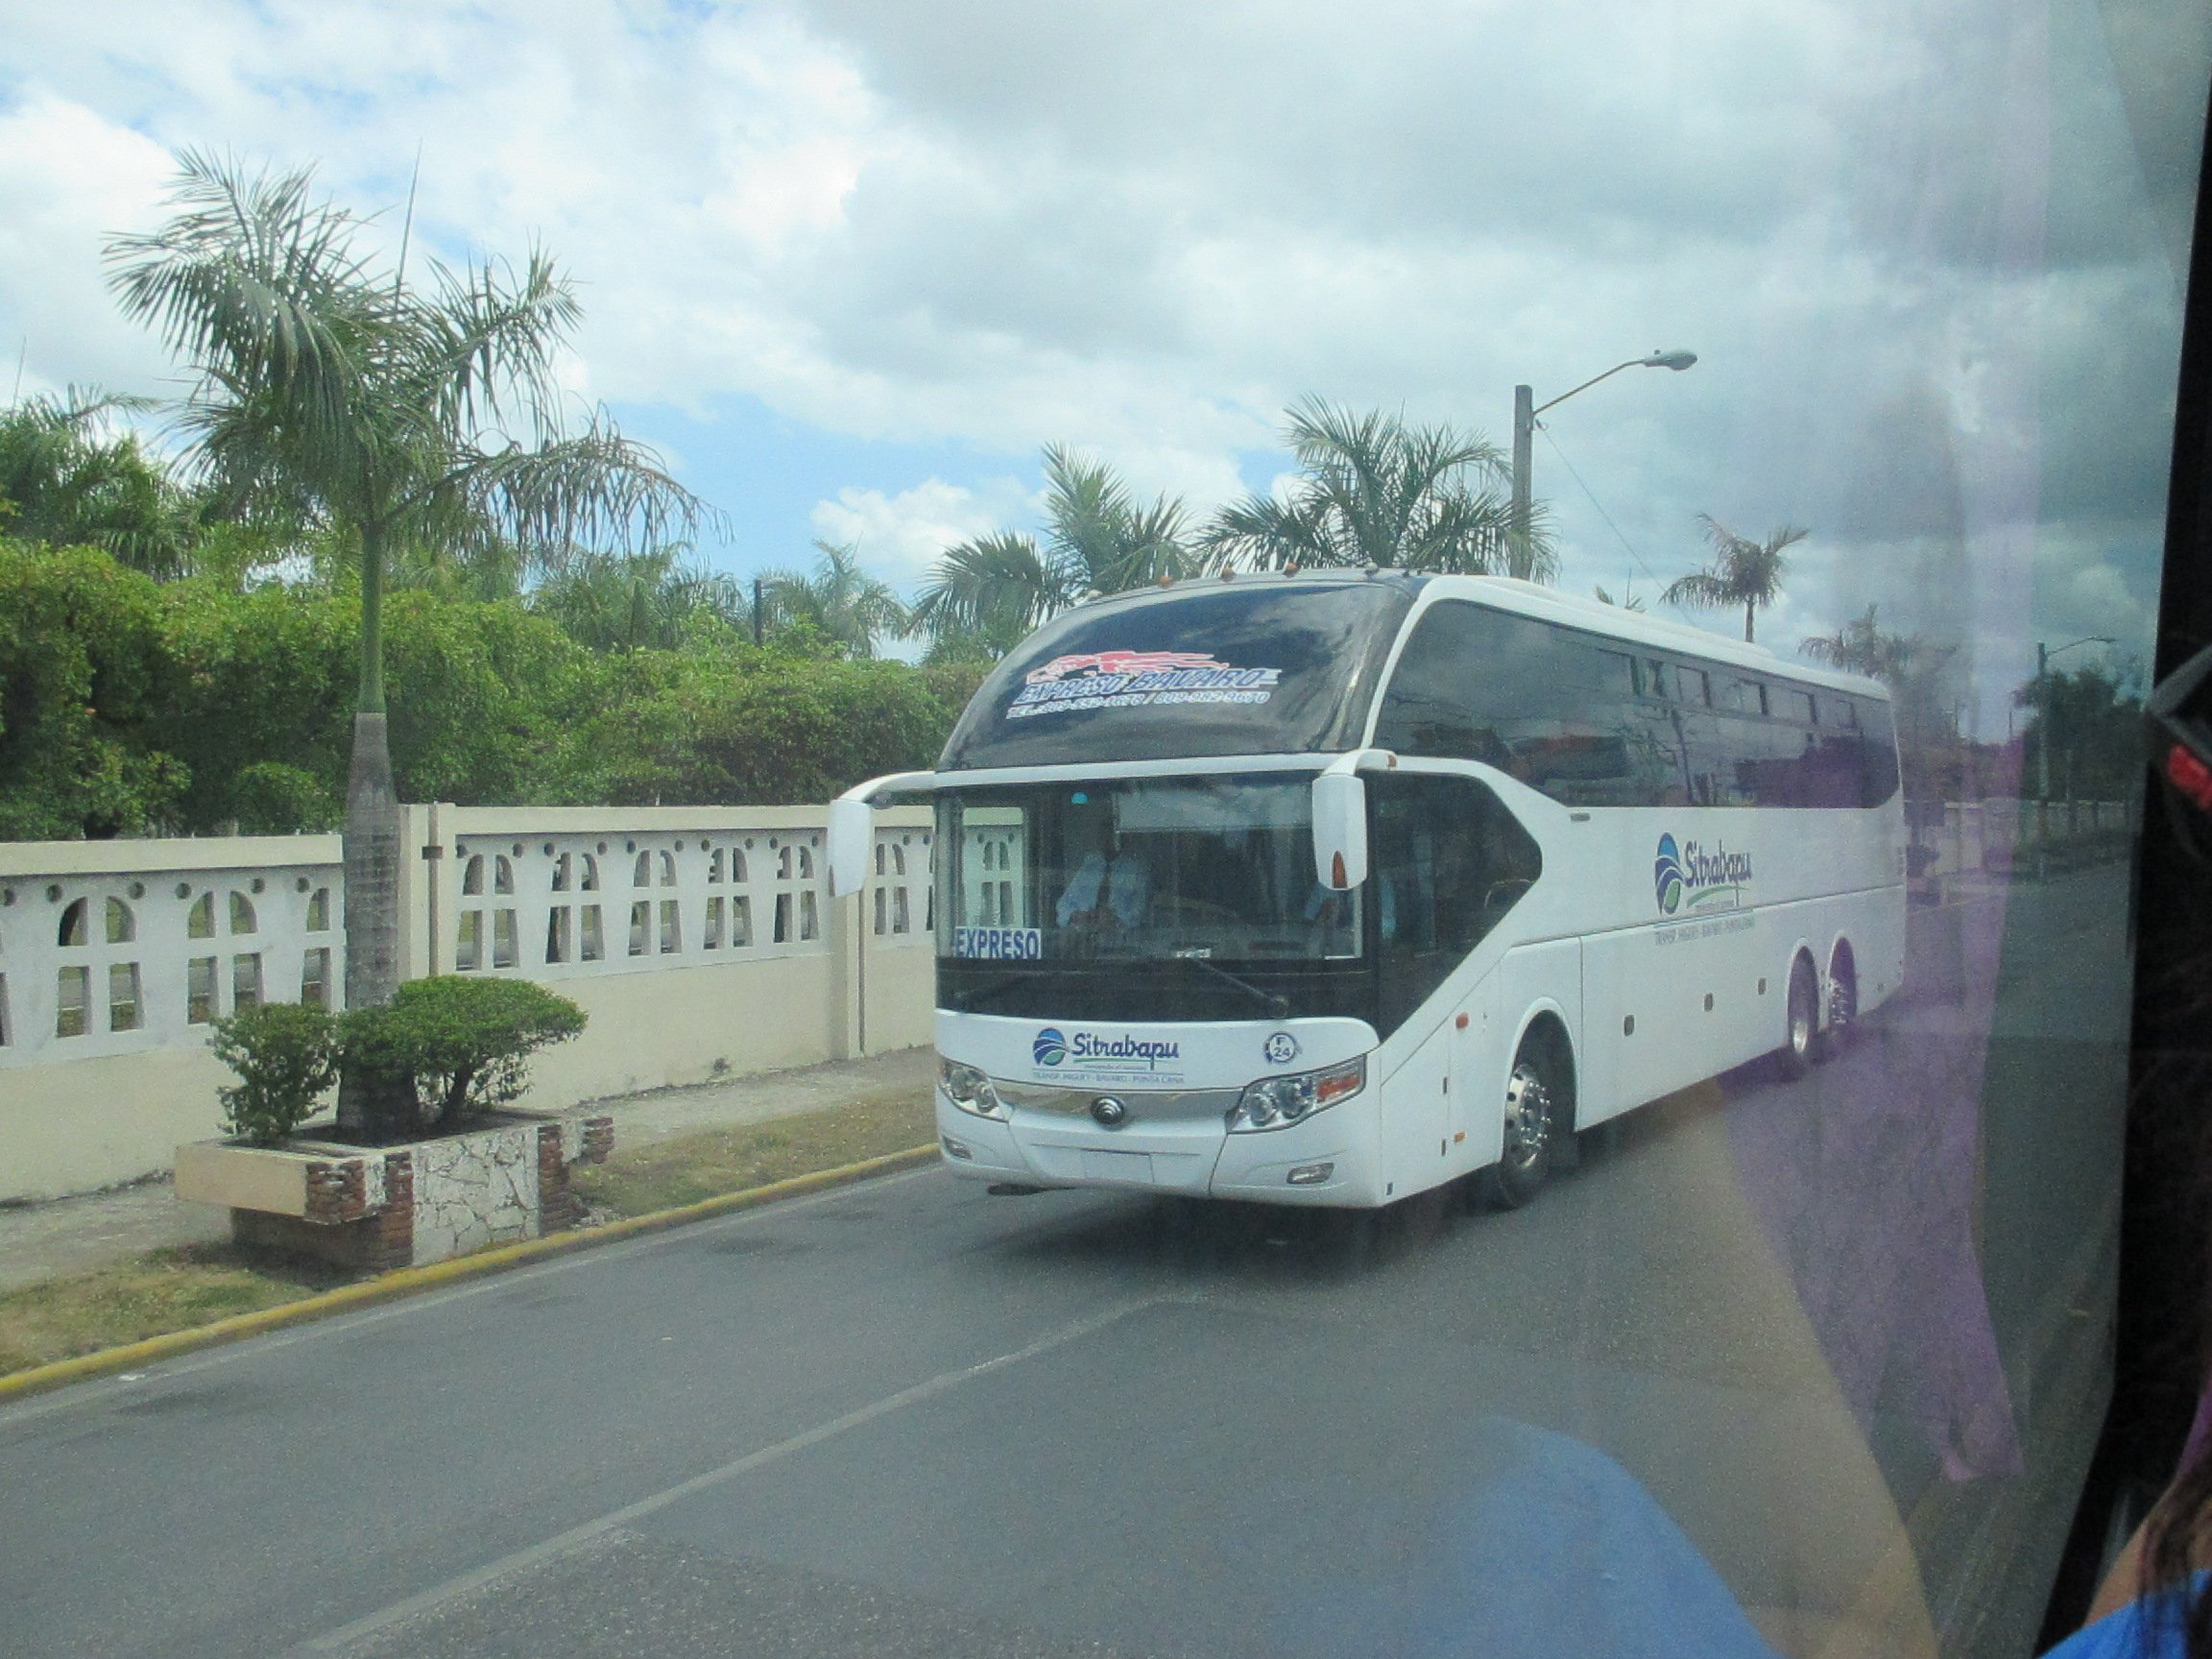 How To Get From Punta Cana Airport to Jarabacoa - All Possible Ways, cheapest way from Punta Cana to Jarabacoa, Punta Cana to Jarabacoa, Punta Cana to Jarabacoa bus, Punta Cana airport to Jarabacoa, Bavaro Bus Expreso Punta Cana to Jarabacoa